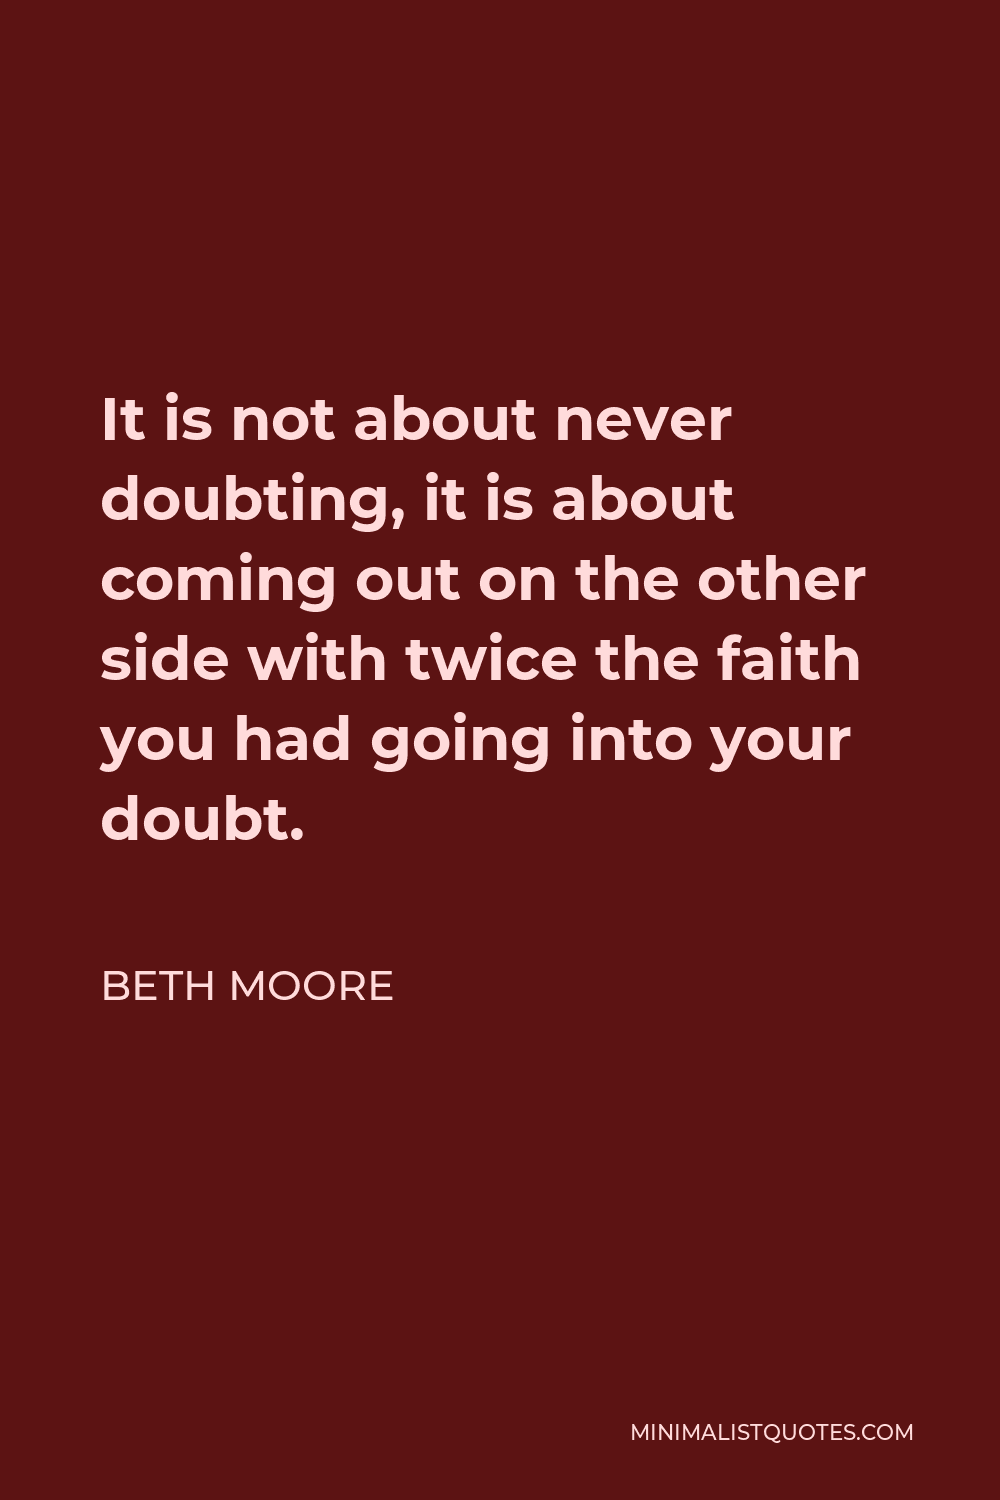 Beth Moore Quote - It is not about never doubting, it is about coming out on the other side with twice the faith you had going into your doubt.